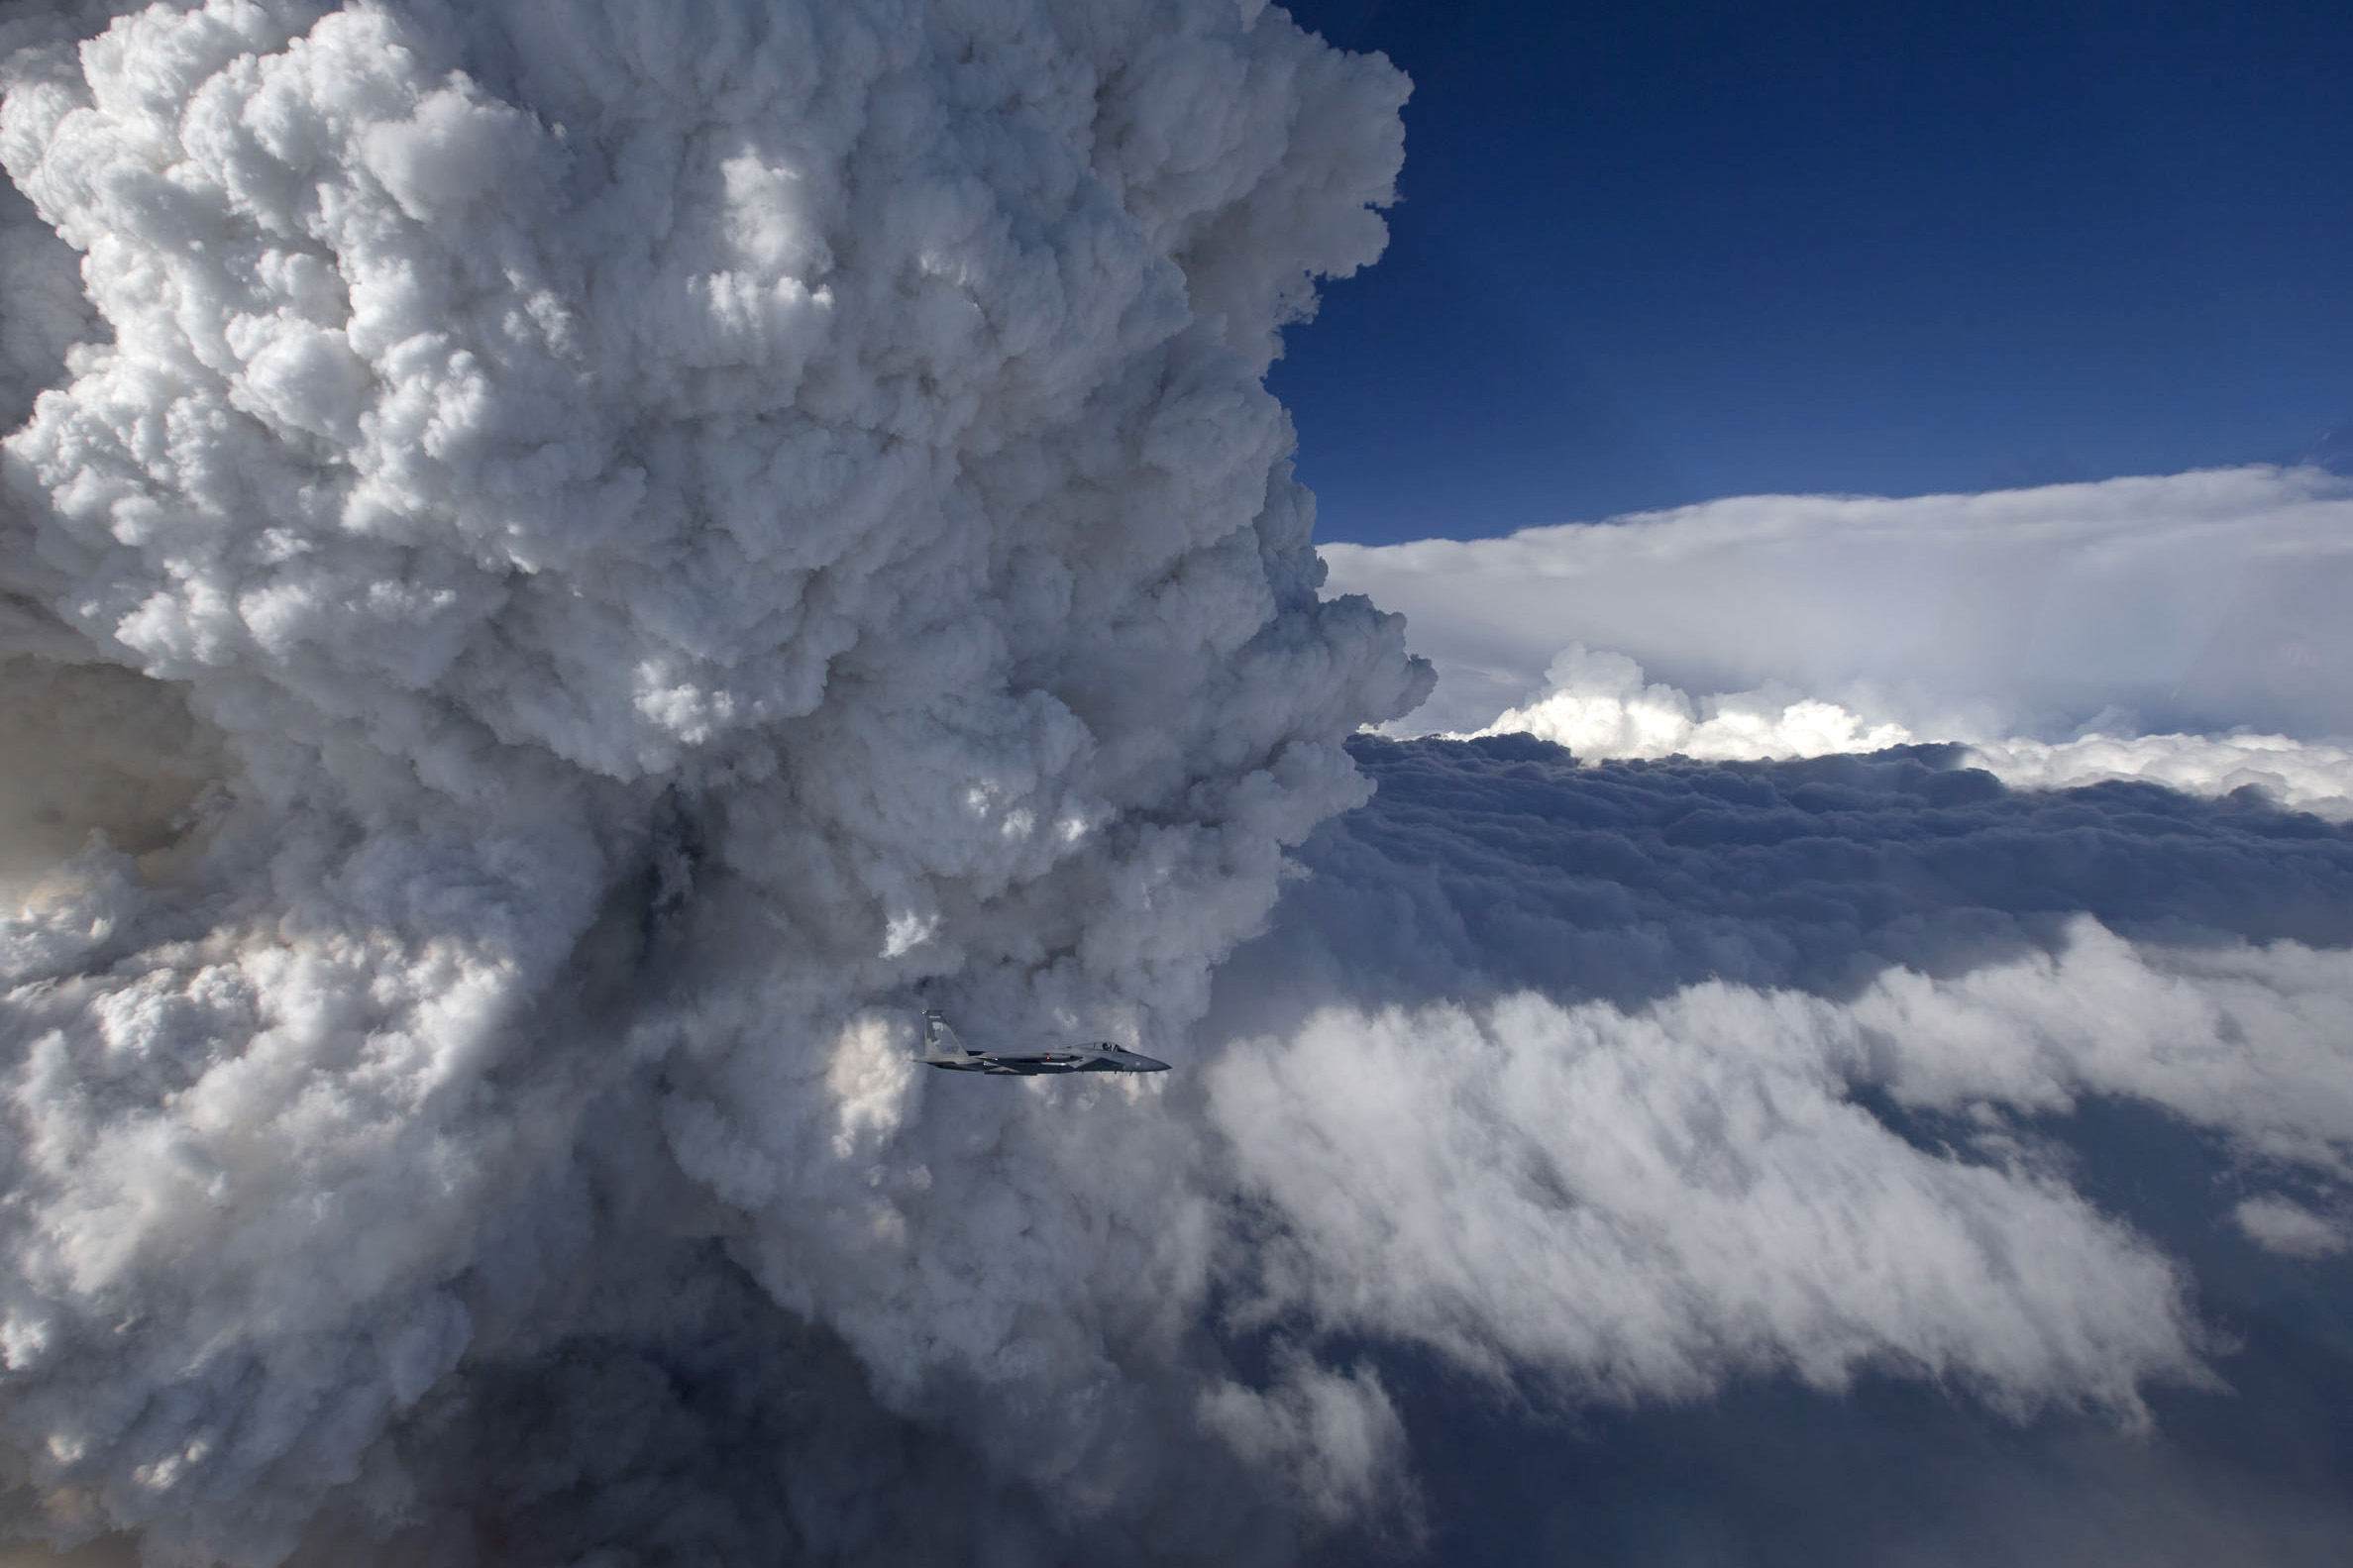 Wildfires can that makes their own weather: A pyrocumulonimbus cloud develops above the Oregon Gulch fire in 2014 as an Air National Guard plane flies past (foreground). 